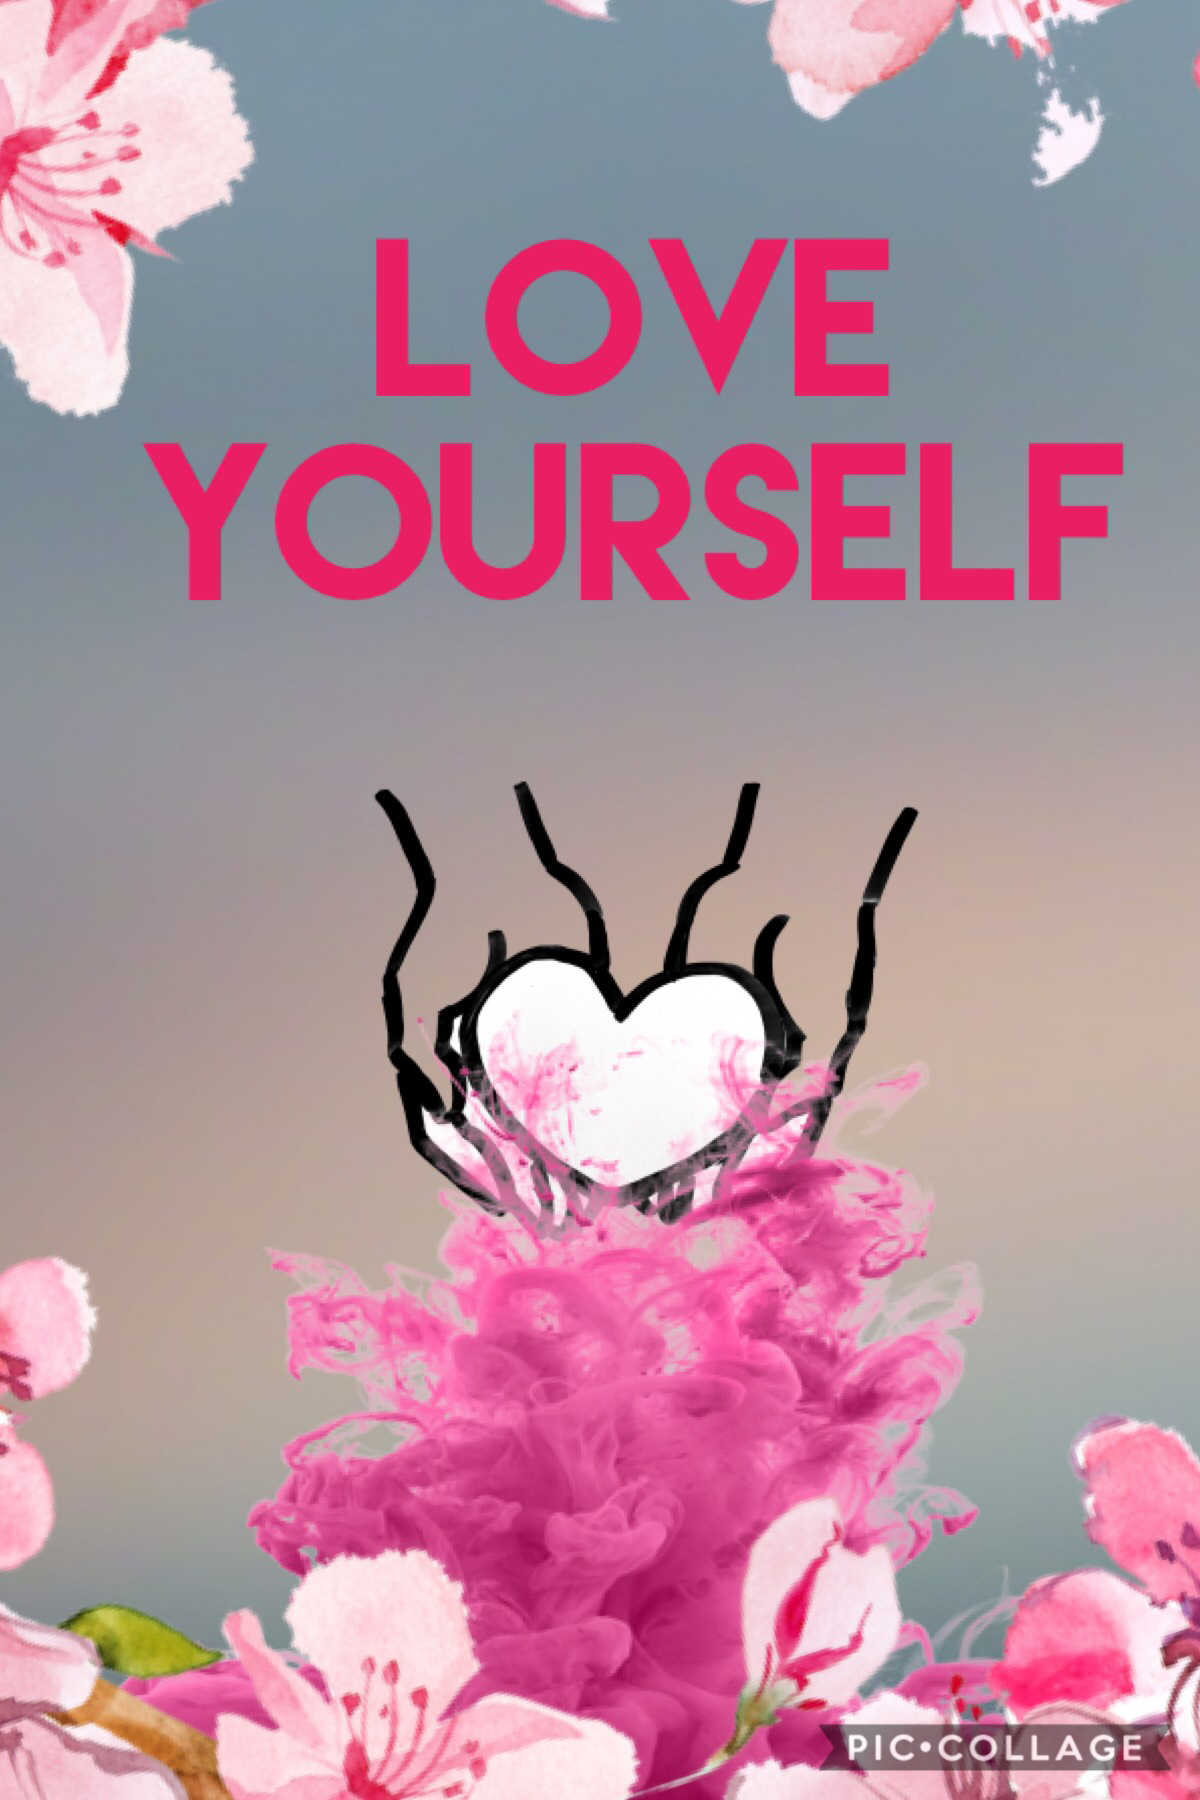 Love Yourself (click)

❤️LOVE YOURSELF❤️



Like,share,follow and comment!!!!

❤️❤️❤️❤️❤️❤️❤️❤️